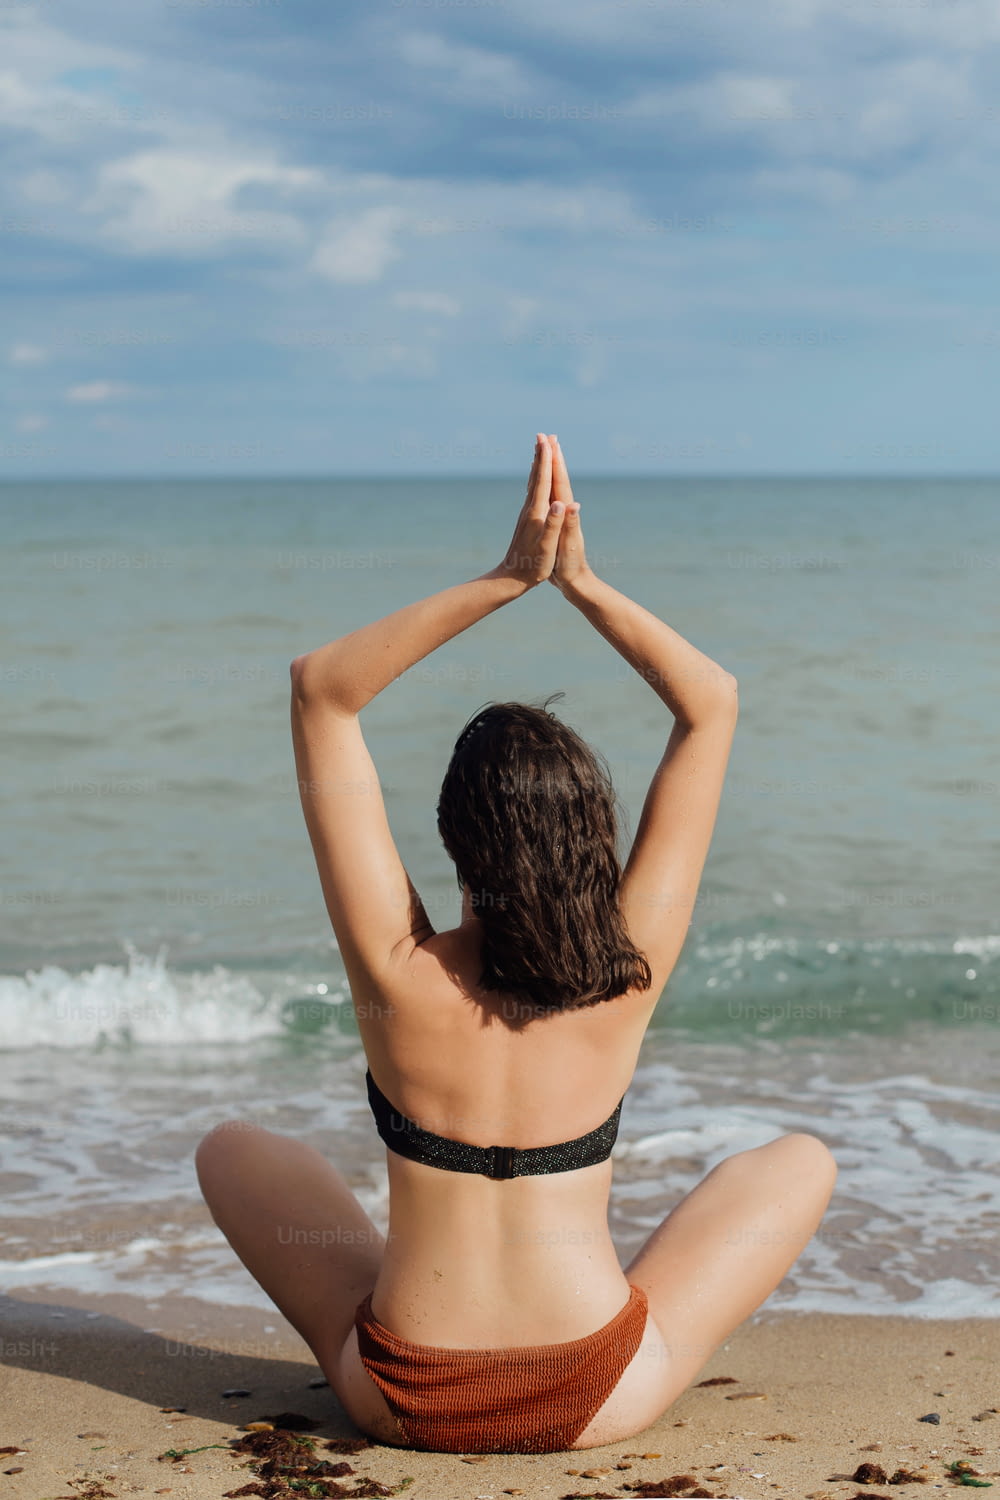 Young fit woman practicing yoga on the beach, sitting on sand and looking at sea waves. Girl meditating on summer vacation. Mental health and self care concept